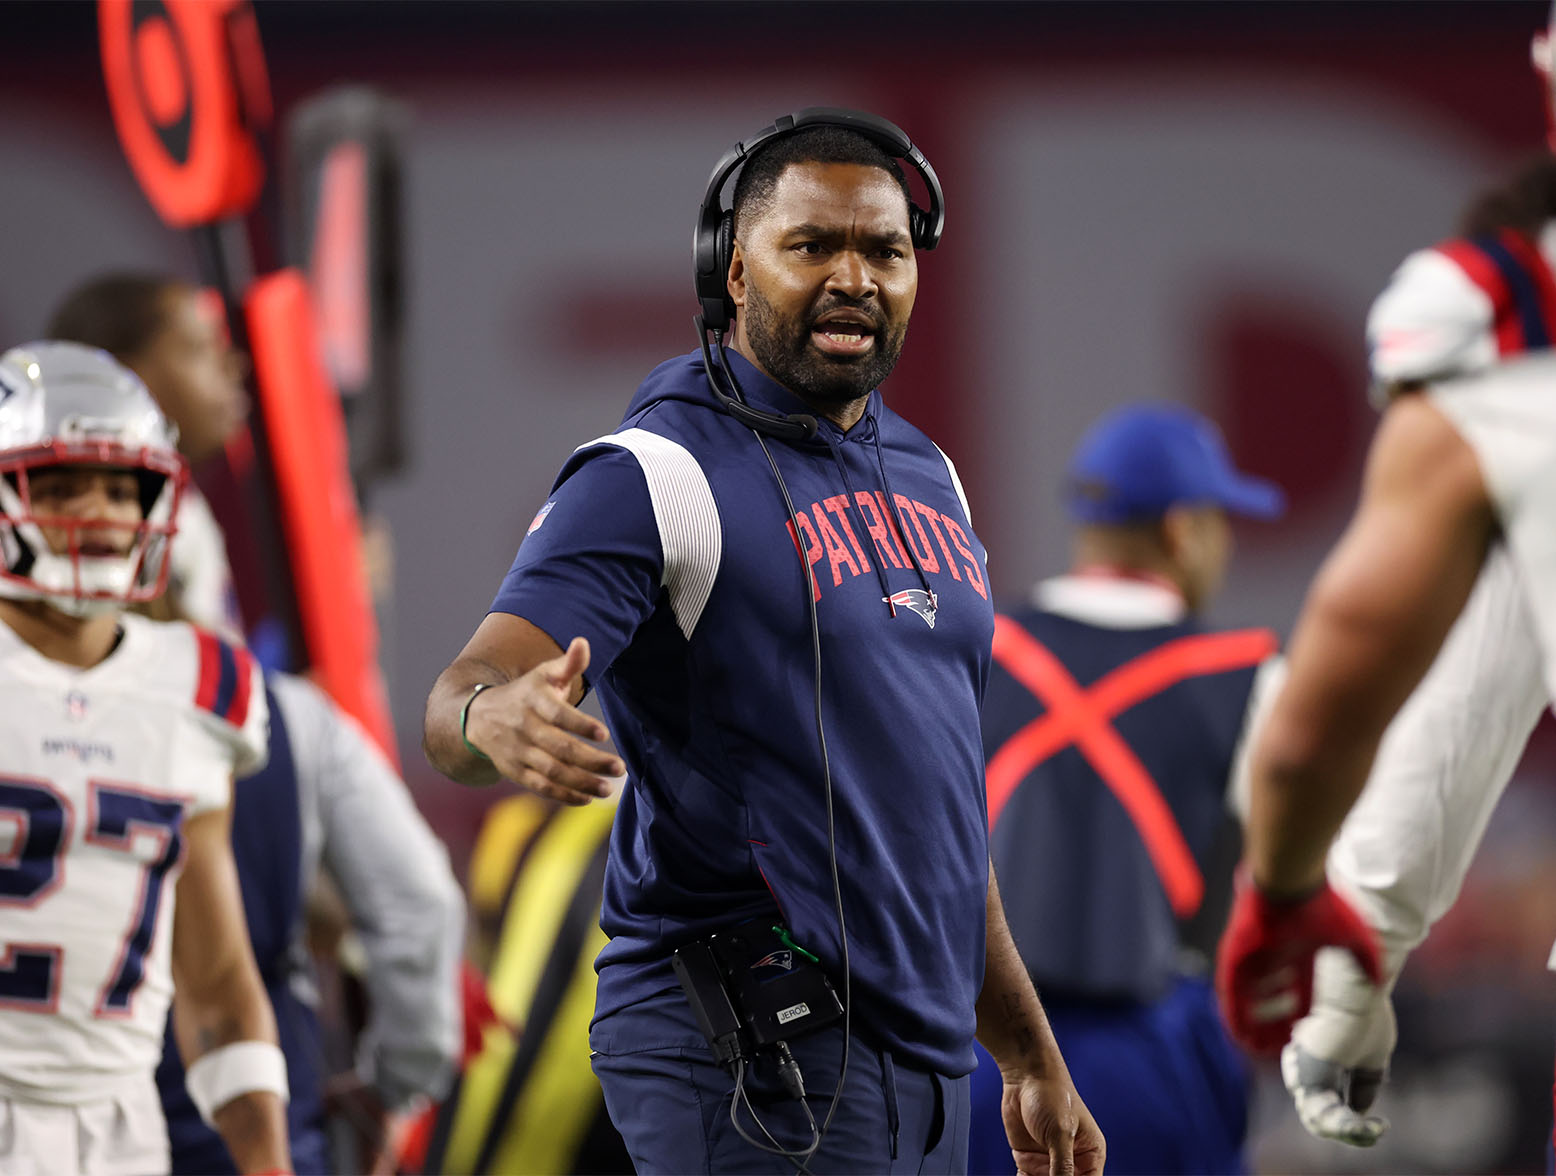 GLENDALE, ARIZONA - DECEMBER 12: Coach Jerod Mayo of the New England Patriots during the NFL game at State Farm Stadium on December 12, 2022 in Glendale, Arizona. The Patriots defeated the Cardinals 27-13. (Photo by Christian Petersen/Getty Images)